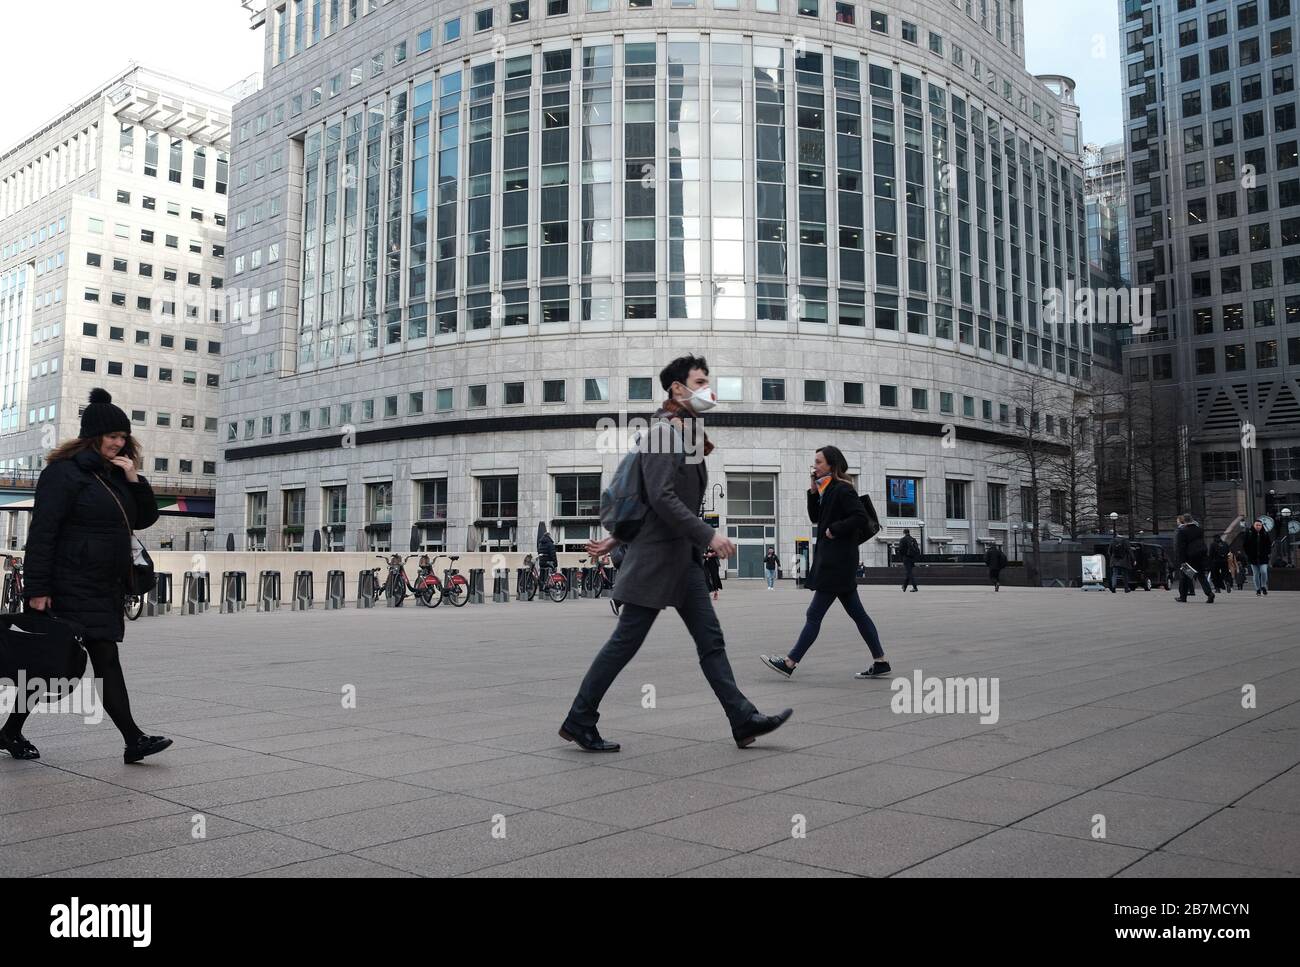 A man wearing a mask walks across Reuters Plaza in Canary Wharf, London, the day after Prime Minister Boris Johnson called on people to stay away from pubs, clubs and theatres, work from home if possible and avoid all non-essential contacts and travel in order to reduce the impact of the coronavirus pandemic. Stock Photo